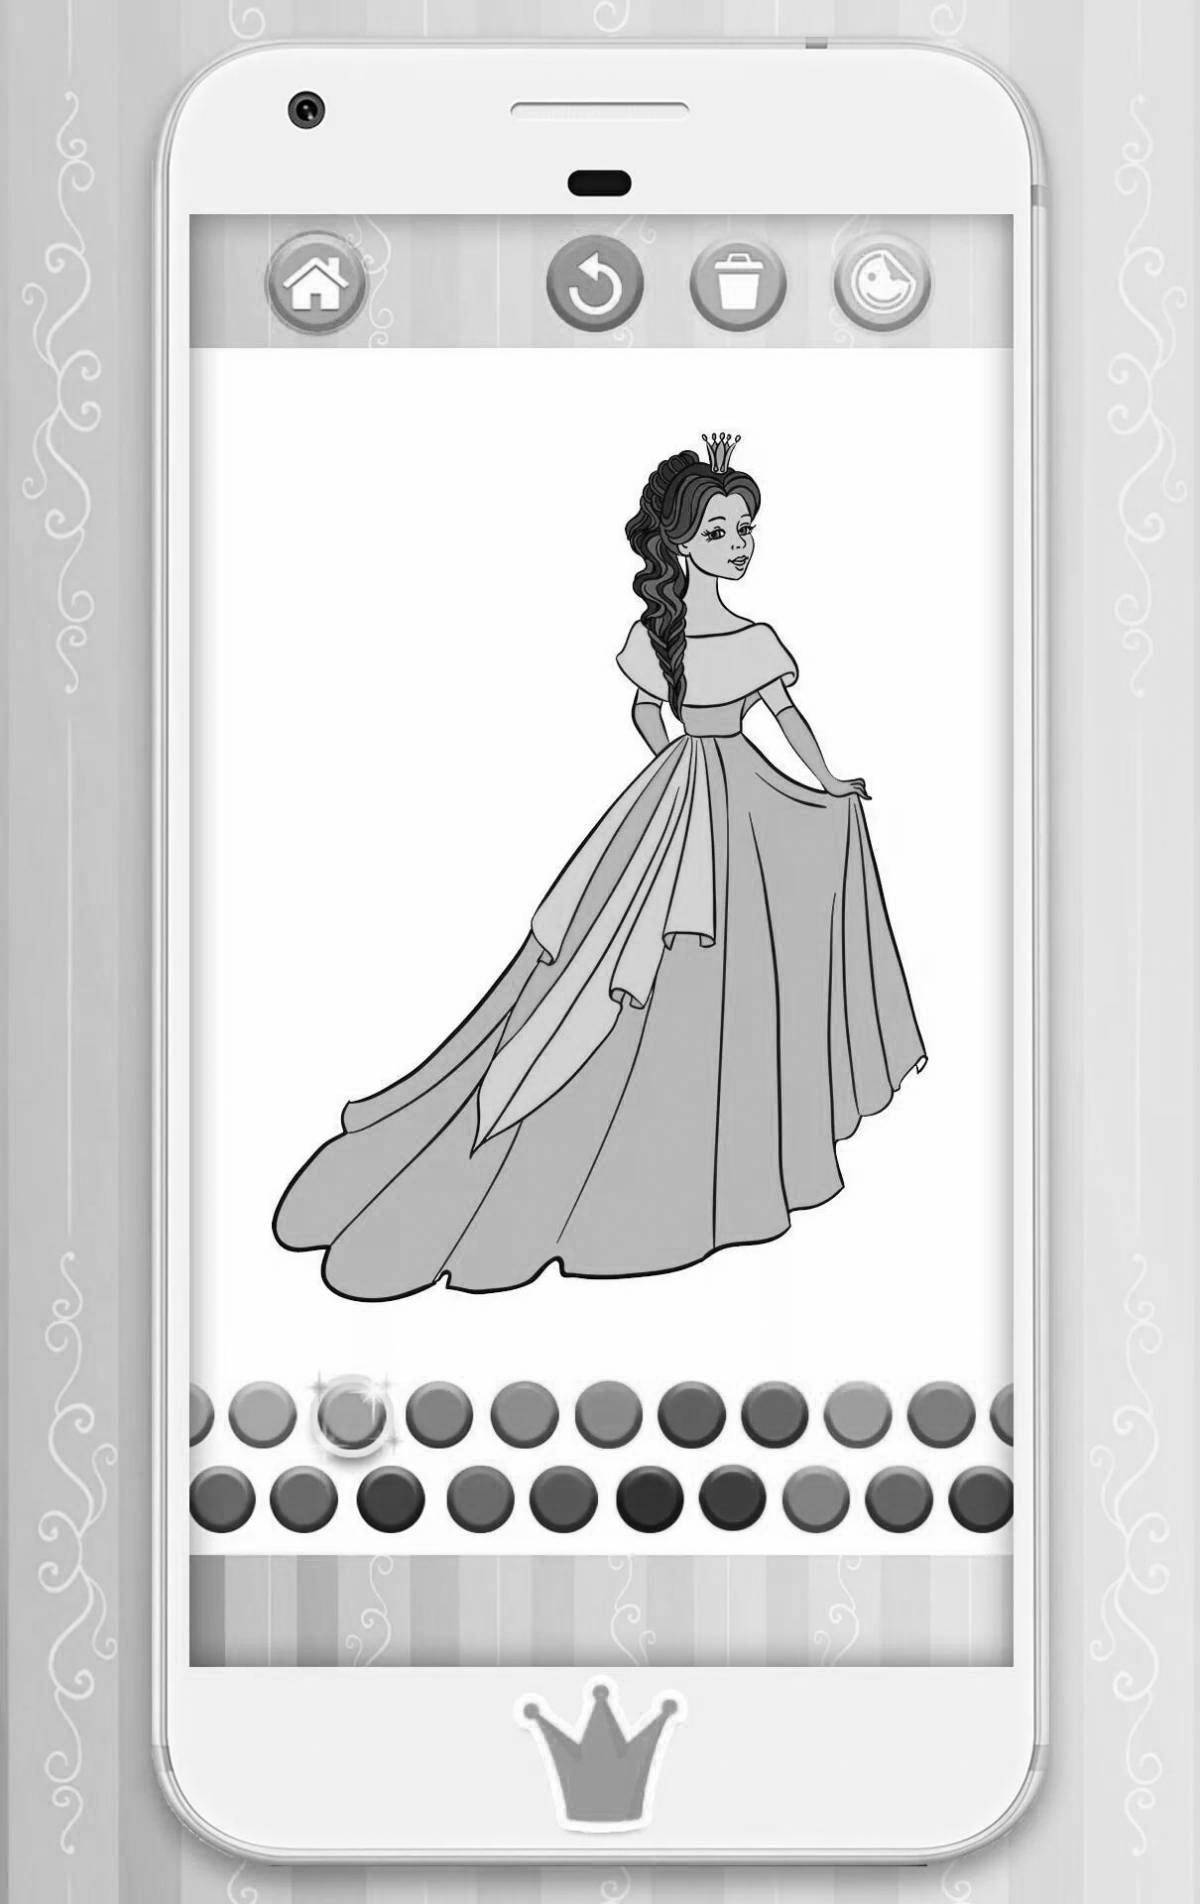 Adorable princess coloring games for girls